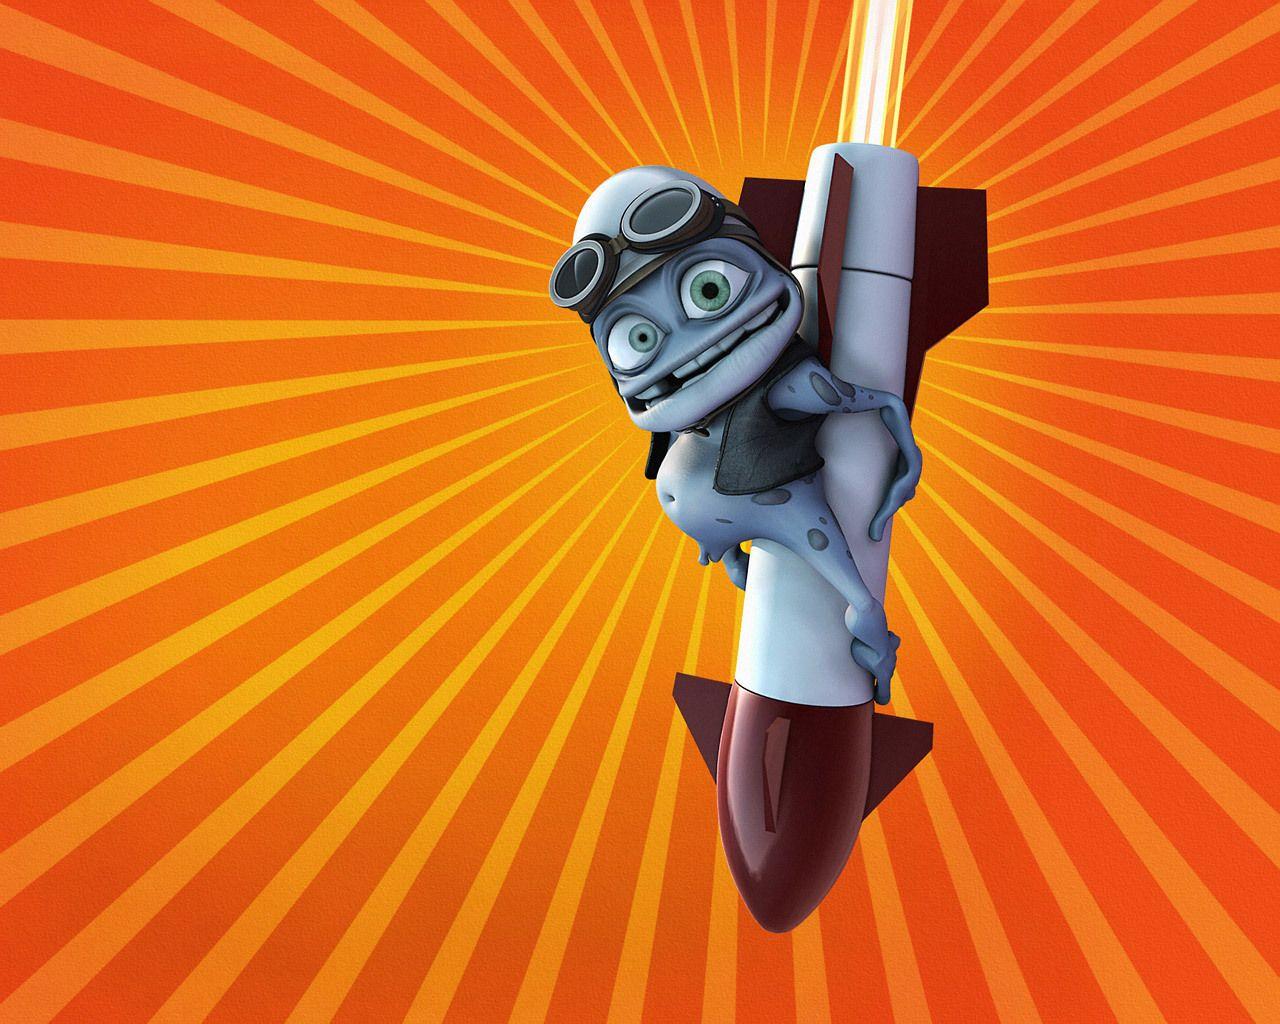 Crazy Frog image crazy frog HD wallpaper and background photo